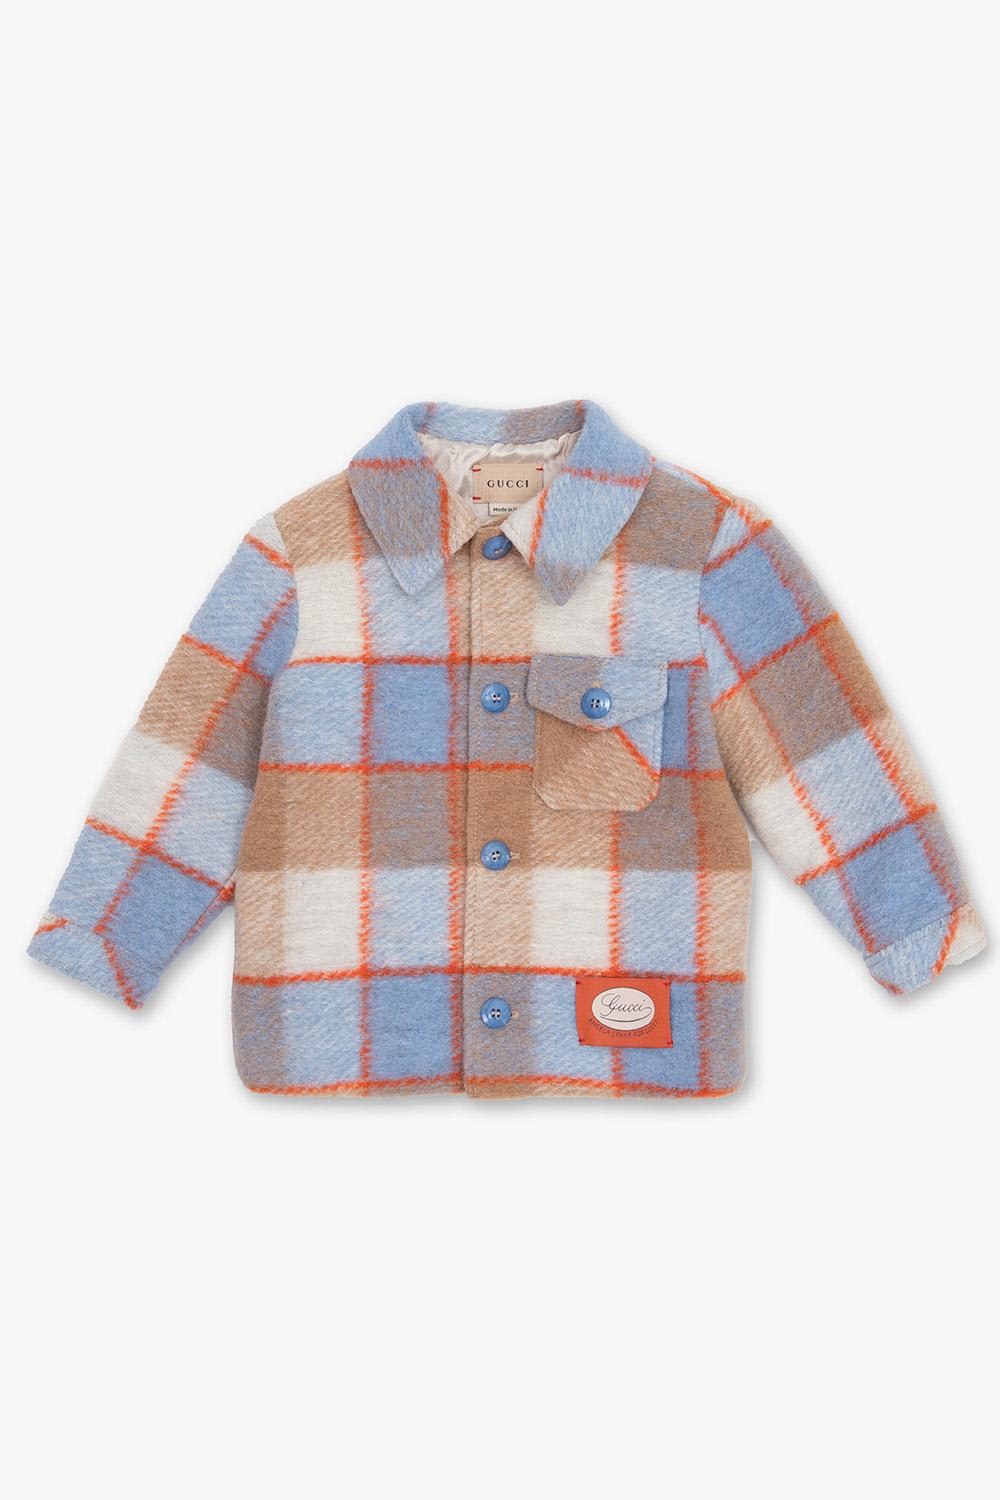 Gucci Babies' Checked Jacket In Blue